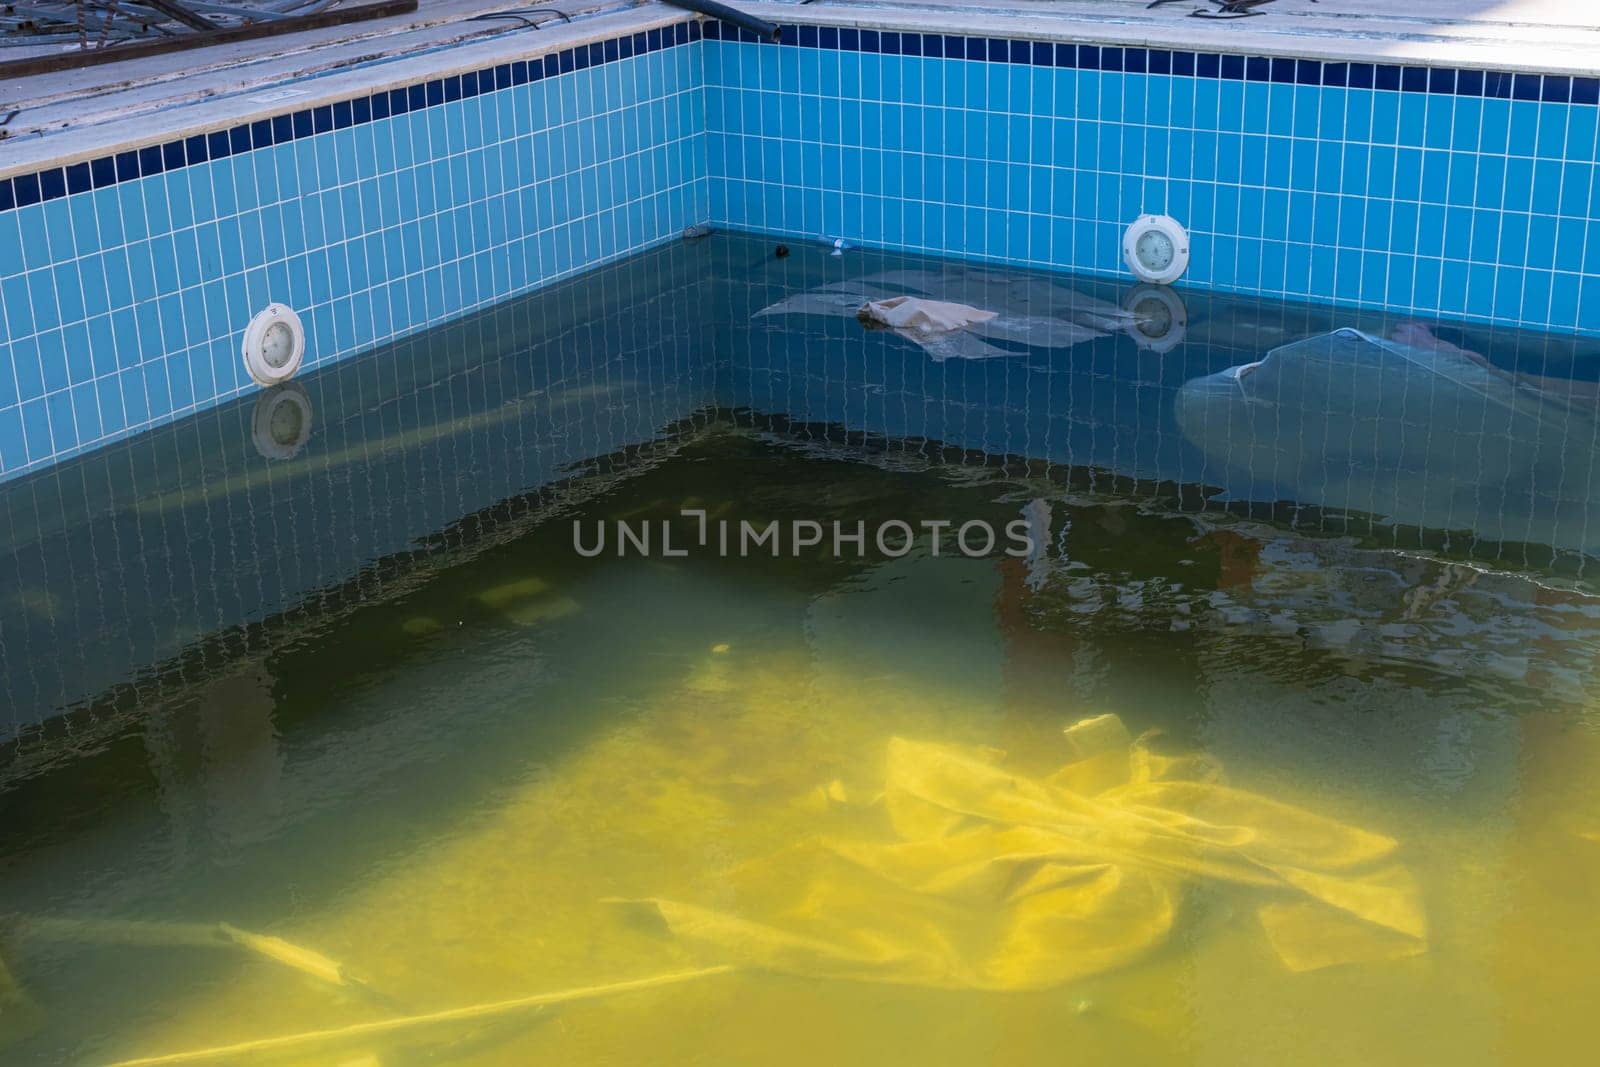 outdoor pool repair,dirty water,outdoor pool cleaning after winter by PopOff